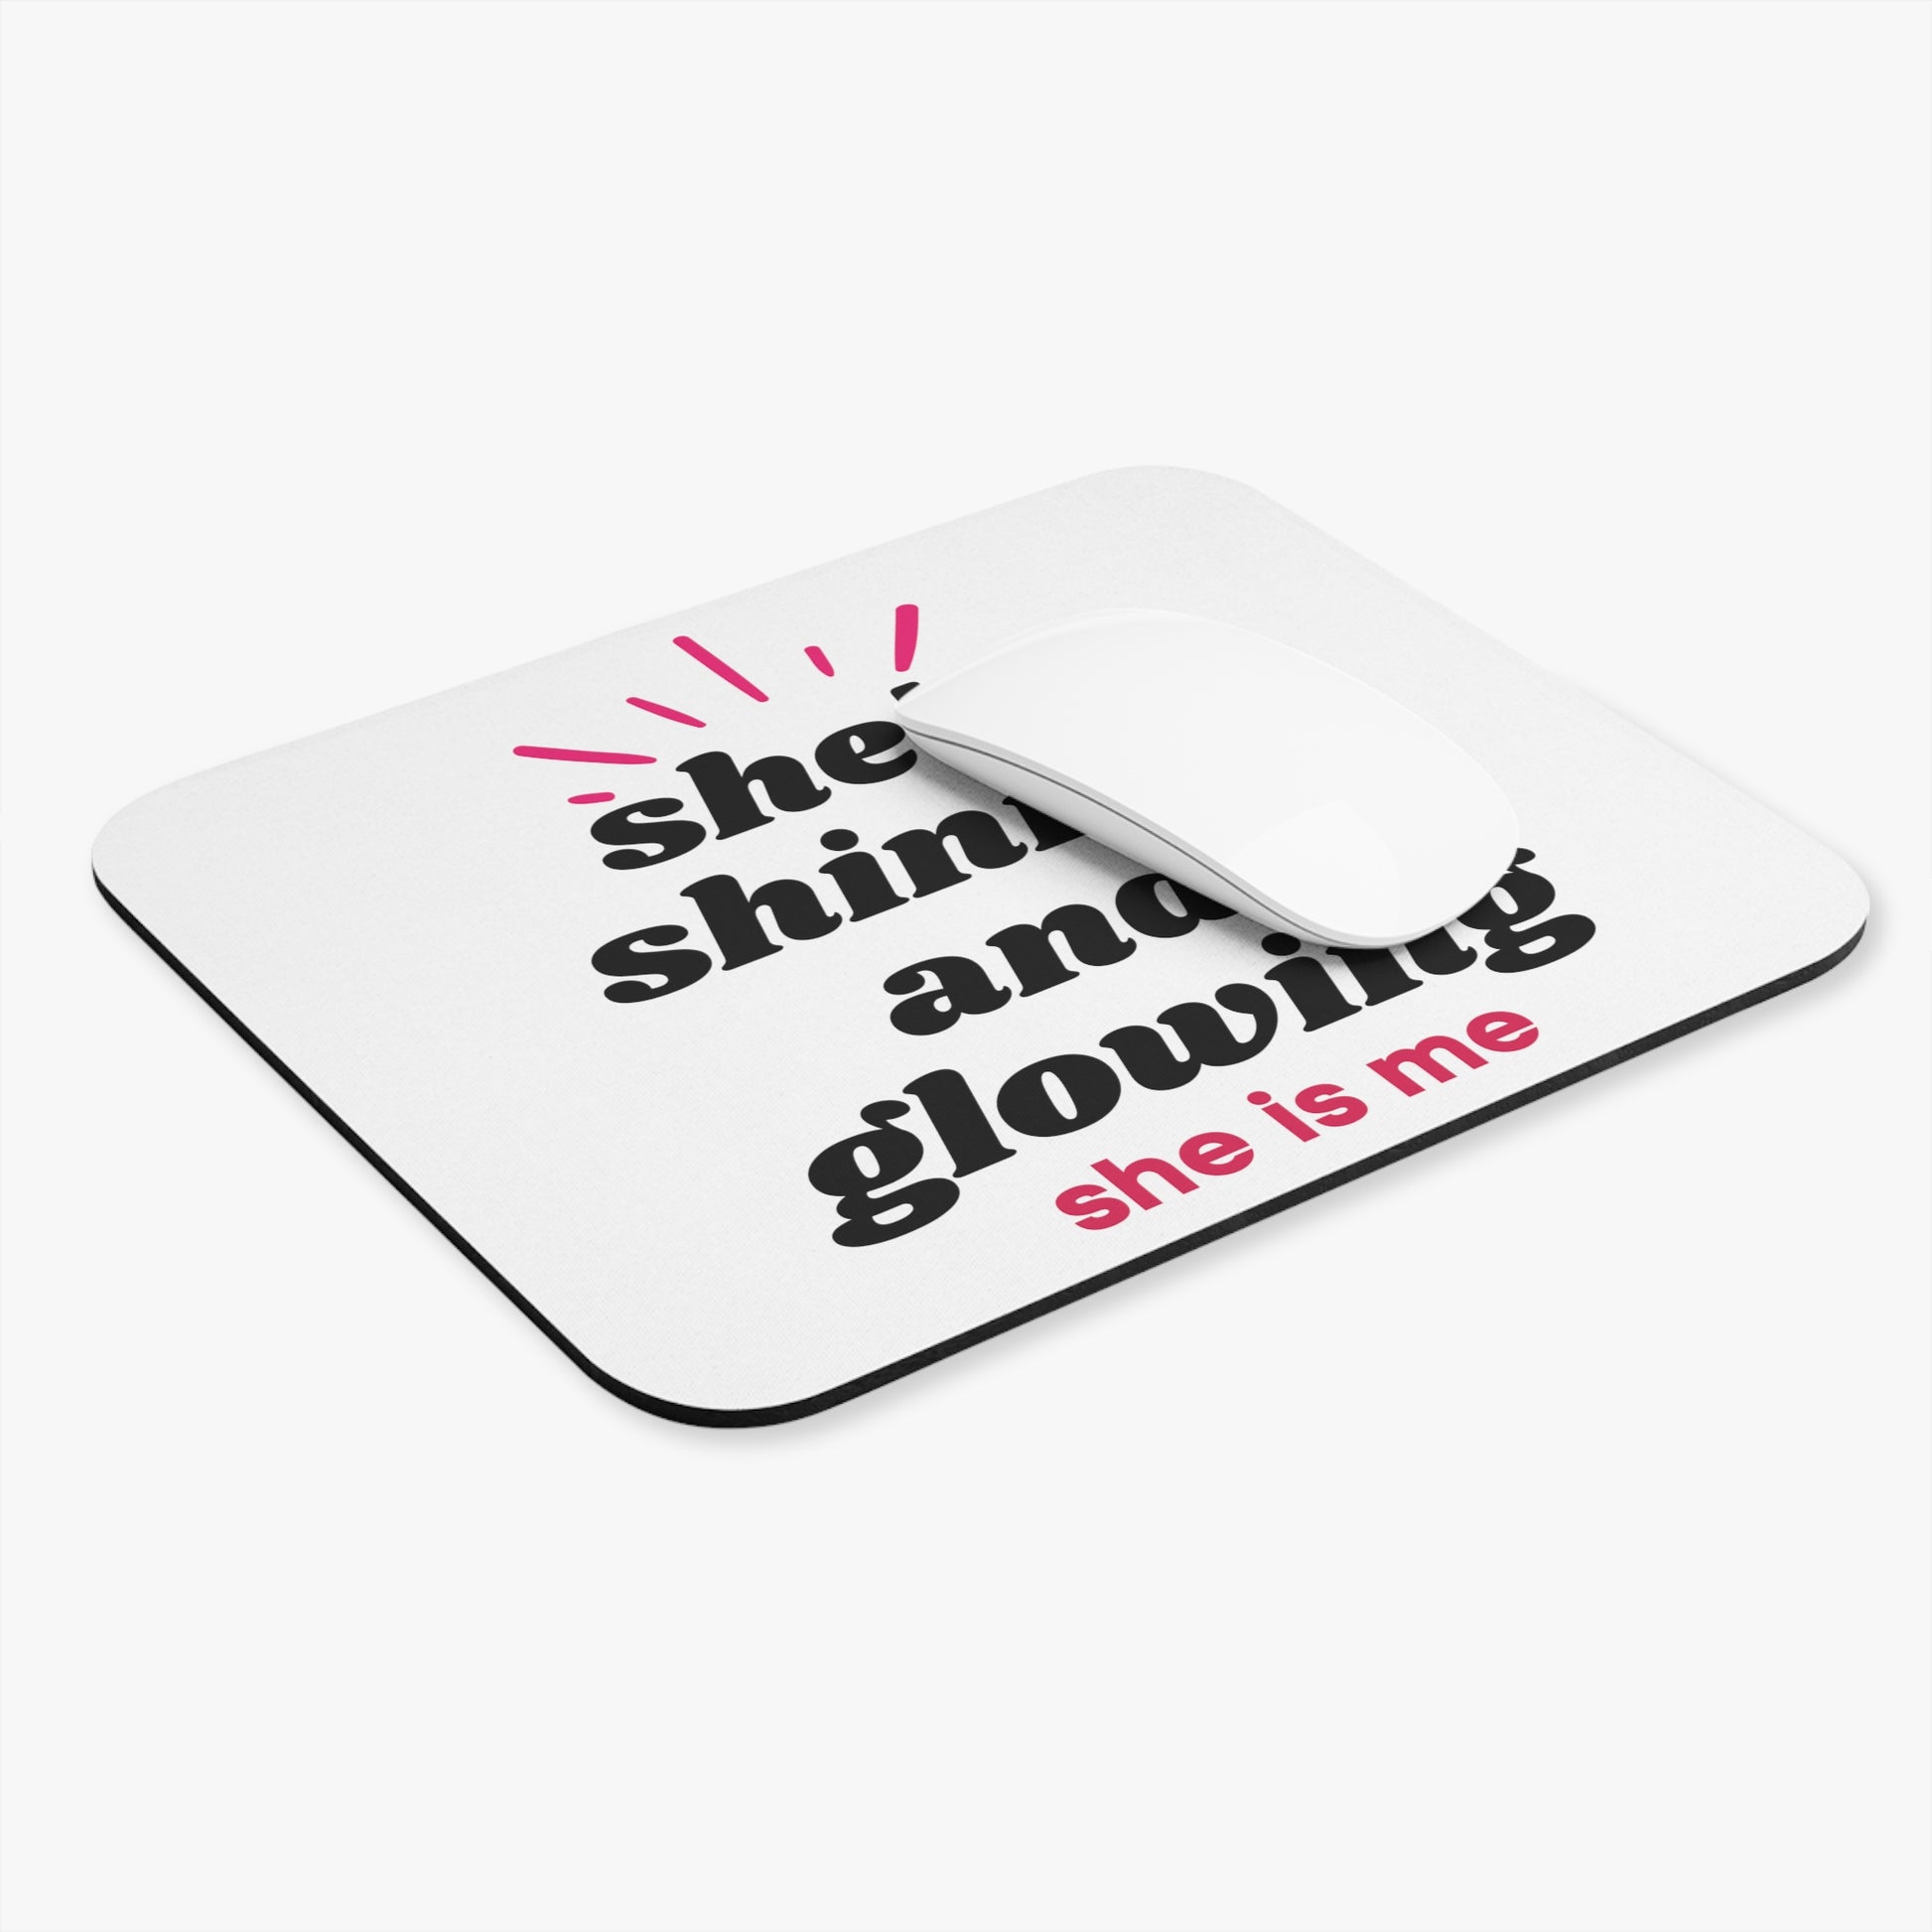 Shining & Glowing Mouse Pad, Christian Mouse Pad, Faith Mouse Pad